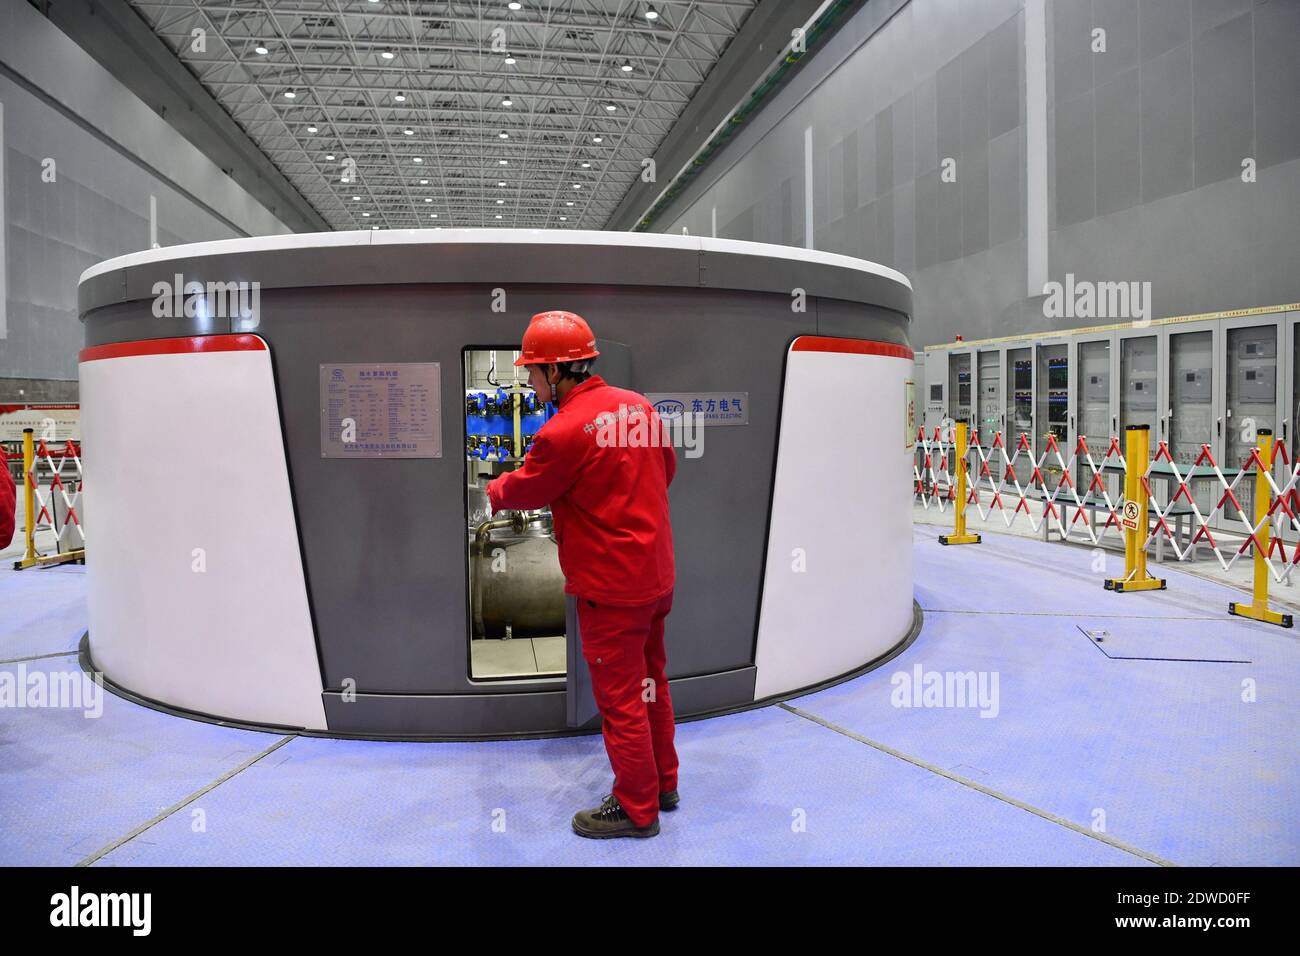 The last turbine unit of the Jixi Pumped-storage Power Station is connected to the grid for power generation, which indicates that China's largest pum Stock Photo